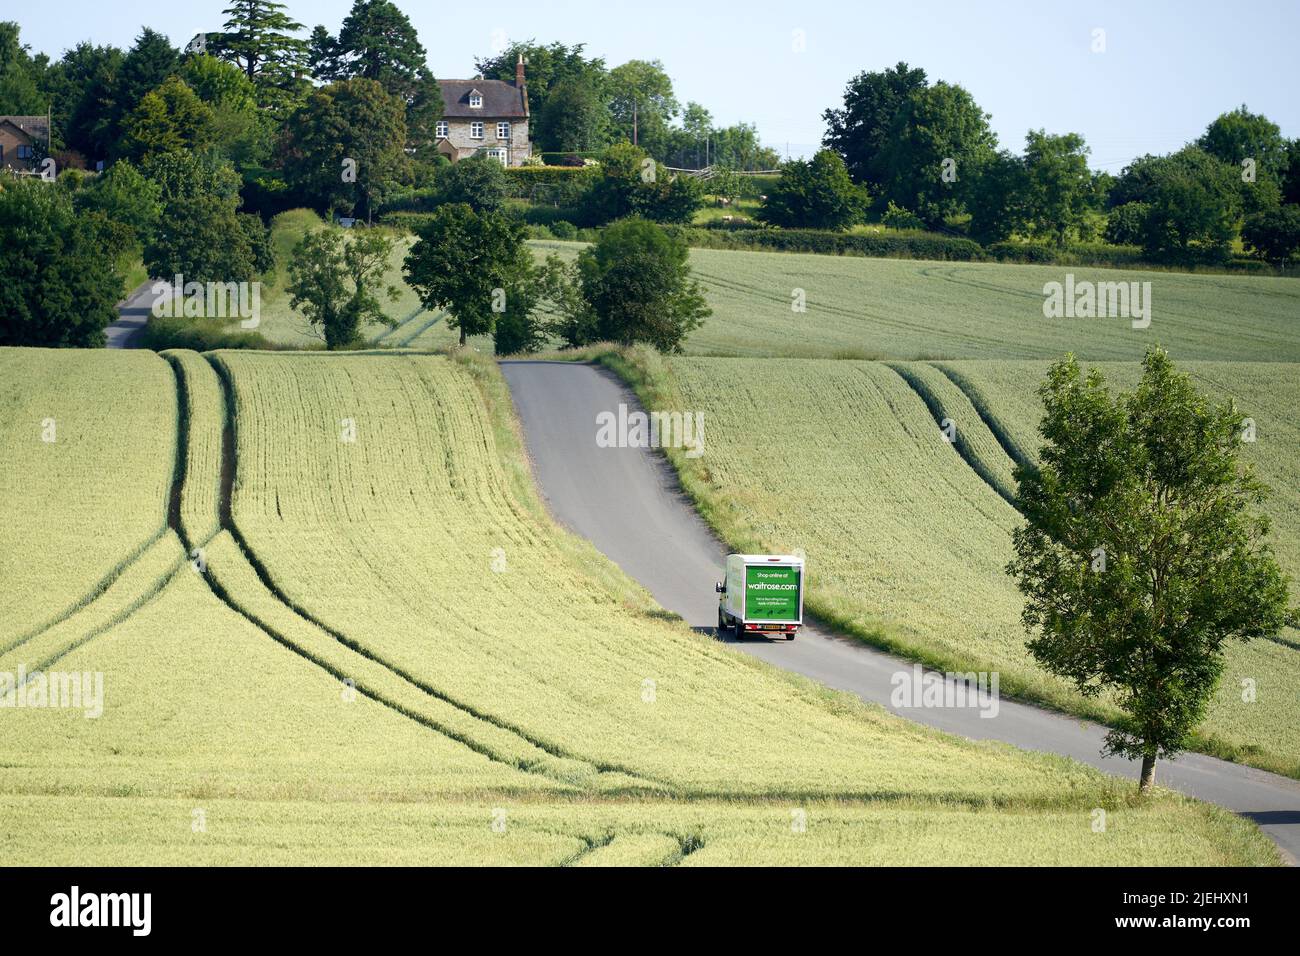 A Waitrose home delivery van makes it's way through the countryside to a make an online supermarket delivery at a customers home Stock Photo